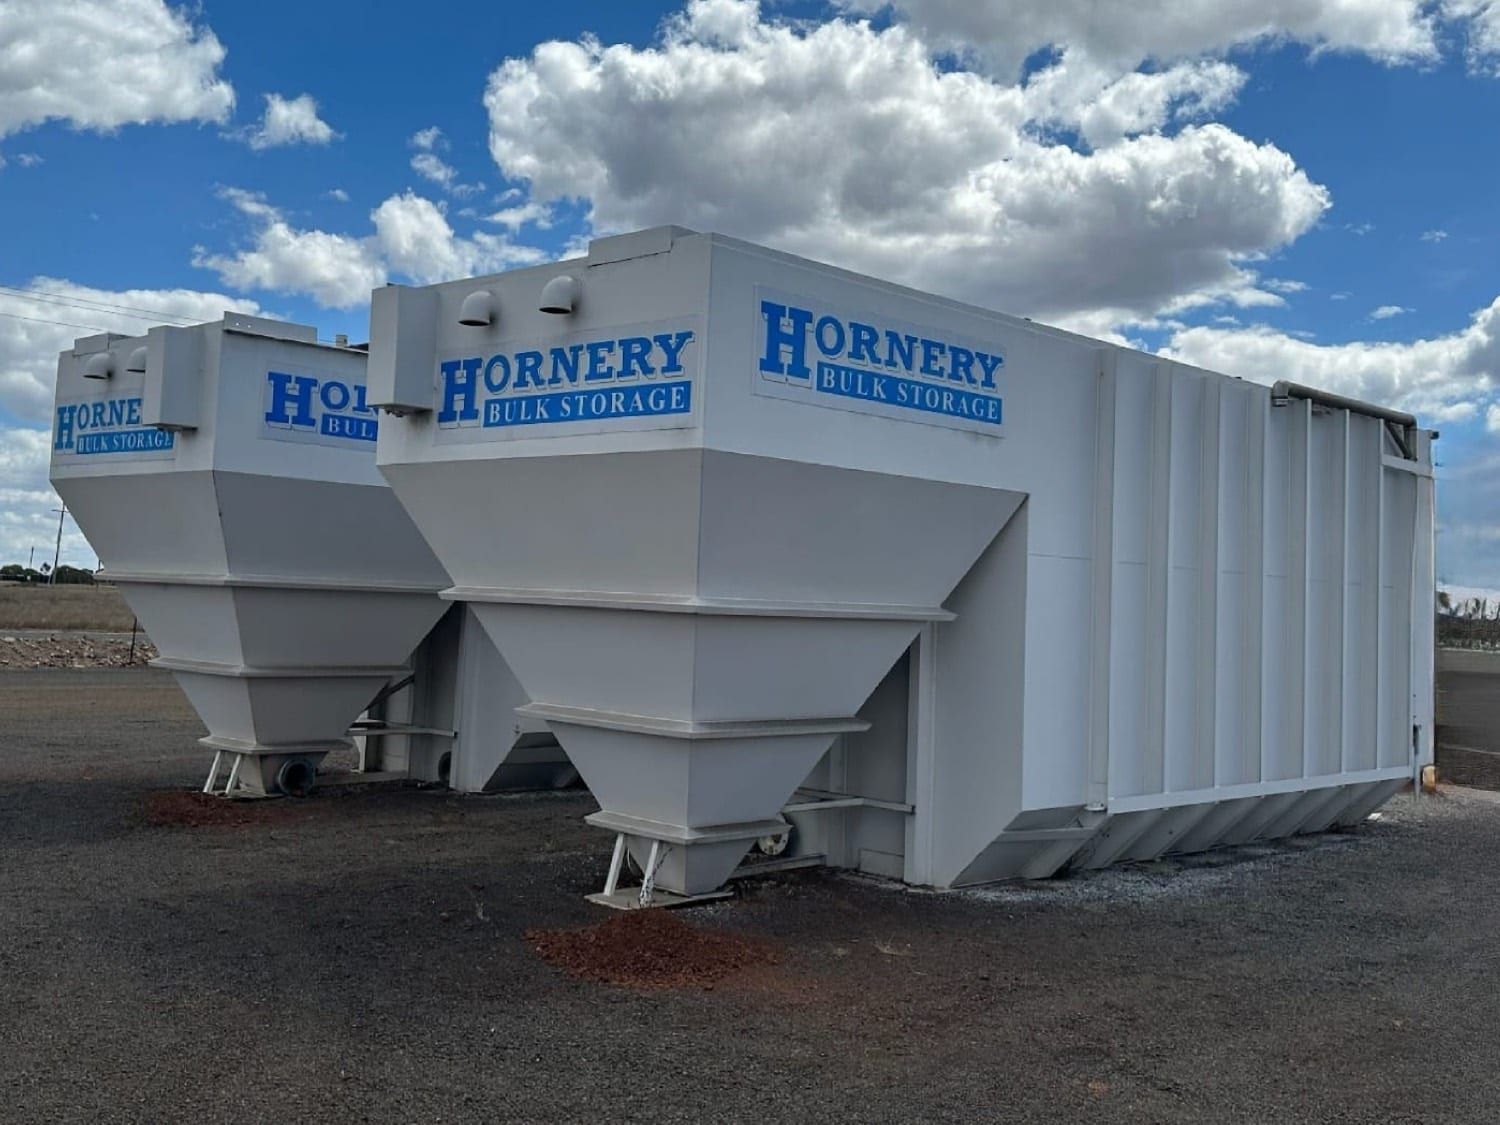 a row of white containers with hornery written on them